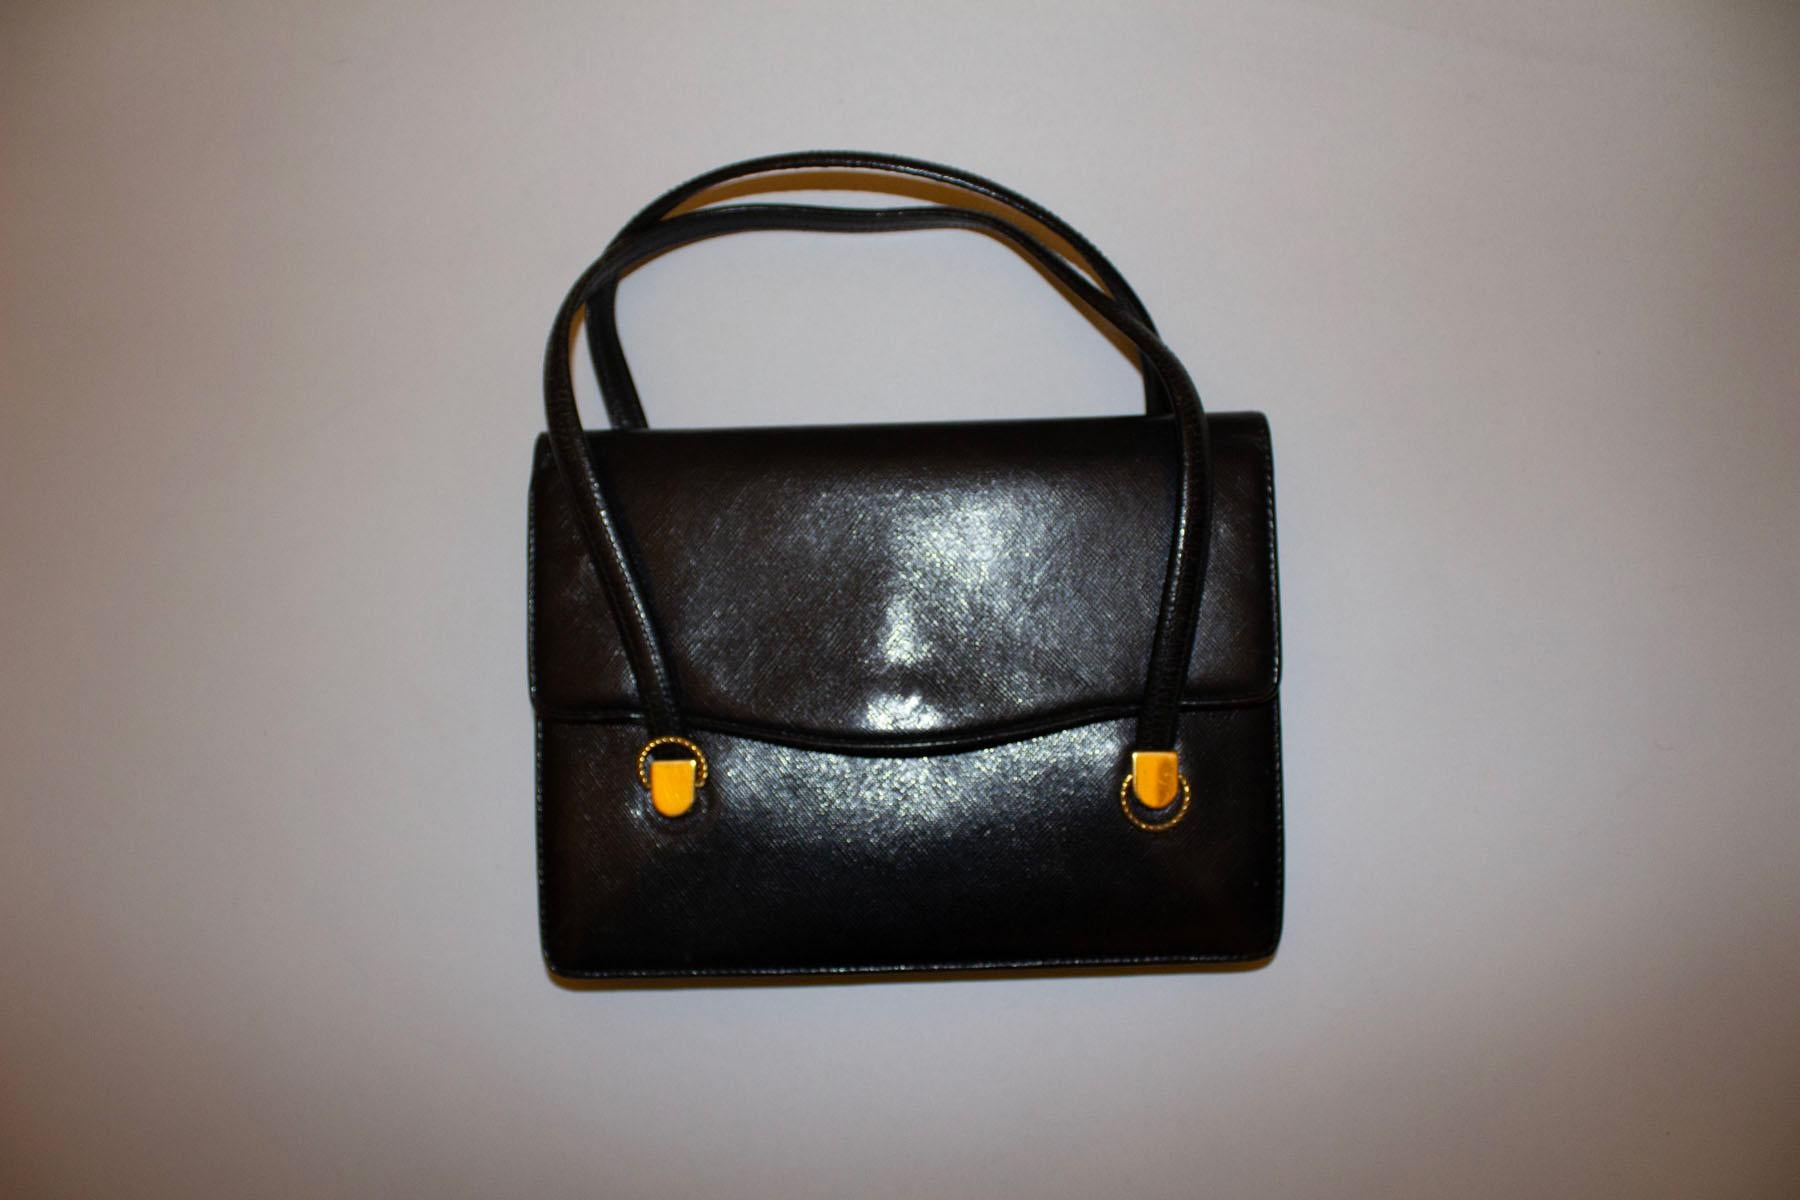 A chic , black leather vintage handbag by Gucci.
Dating from the 1960s, the bag has attractive gilt detail on the front,and internal zip pocket and two internal pouch pockets. It fastens with a popper at the front and has two handles. 
Measurements: